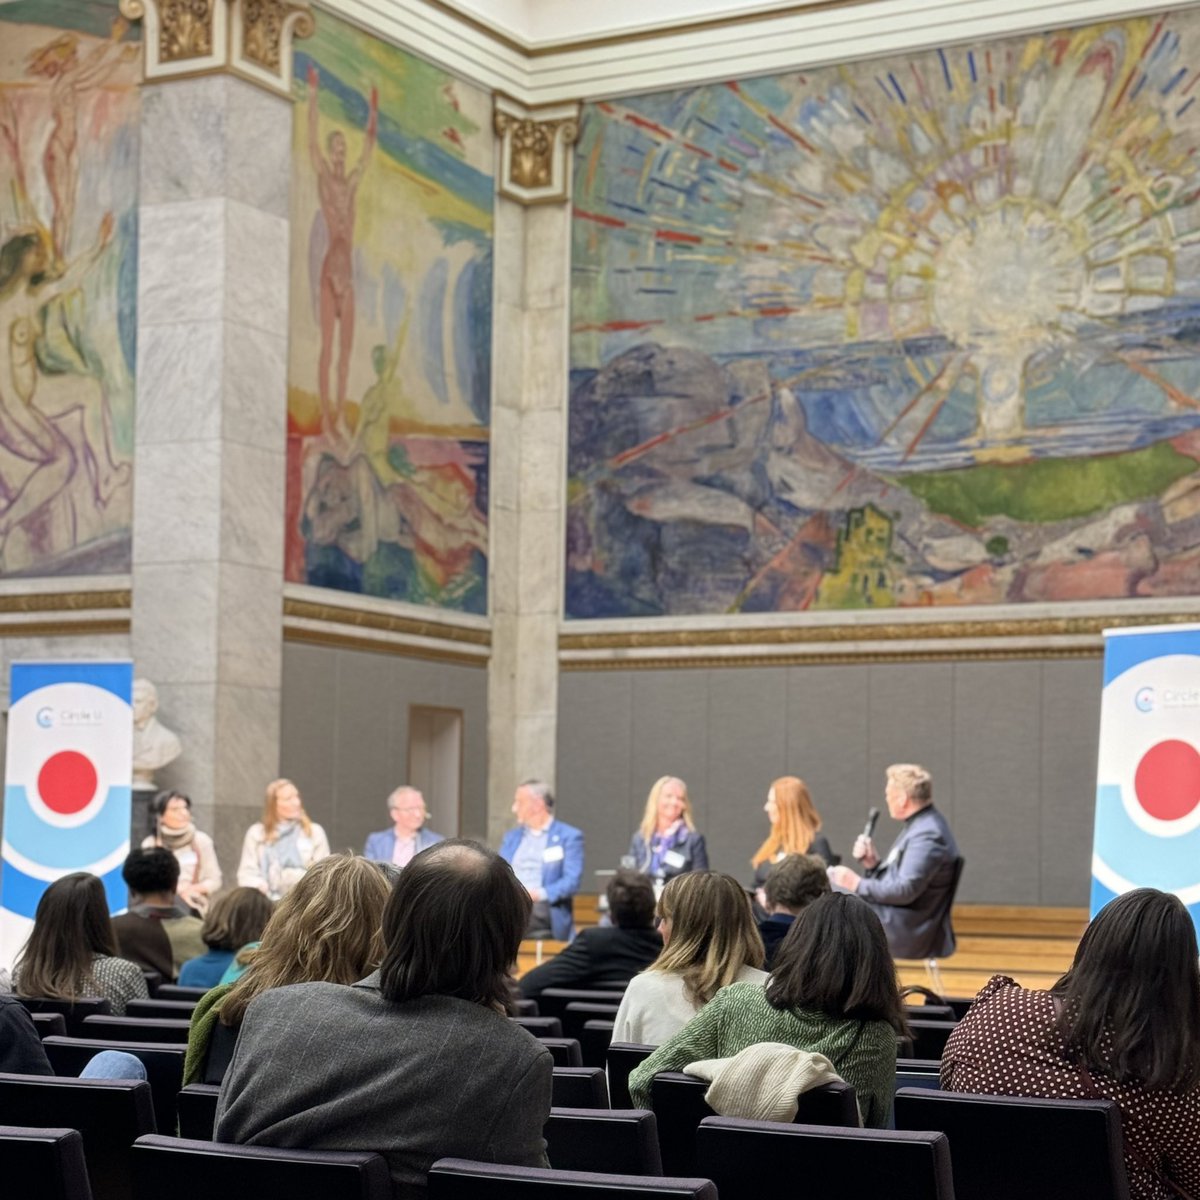 At @UniOslo for the kick-off of @CircleU_eu #2030. Initial reflections a day’s worth of intense & fruitful discussions about the #OpenCampus, our teaching offers for students, communication, connections, mobility & student engagement (actually the key to many of the challenges!)